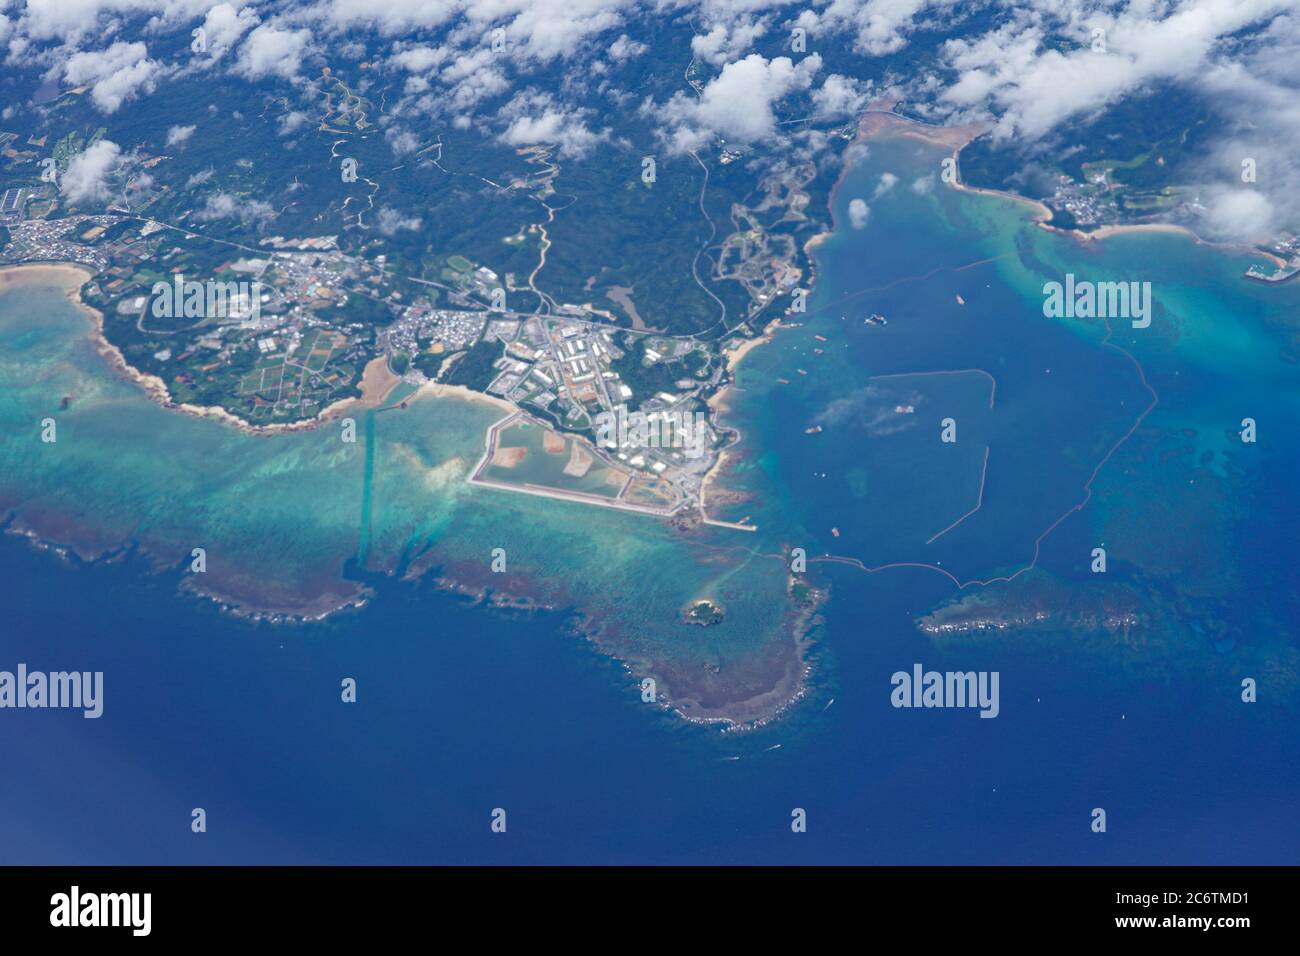 Nago, Okinawa, Japan. 3rd July, 2020. View of the northeastern coast of Okinawa island, where Marine Corps new airfield construction takes place. Japan pushes the controversial landfill work with its increased budget of $8.7 billion. Experts warn that the seabed stability is too weak and the embankment could collapse under its own weight. Credit: Jinhee Lee/SOPA Images/ZUMA Wire/Alamy Live News Stock Photo